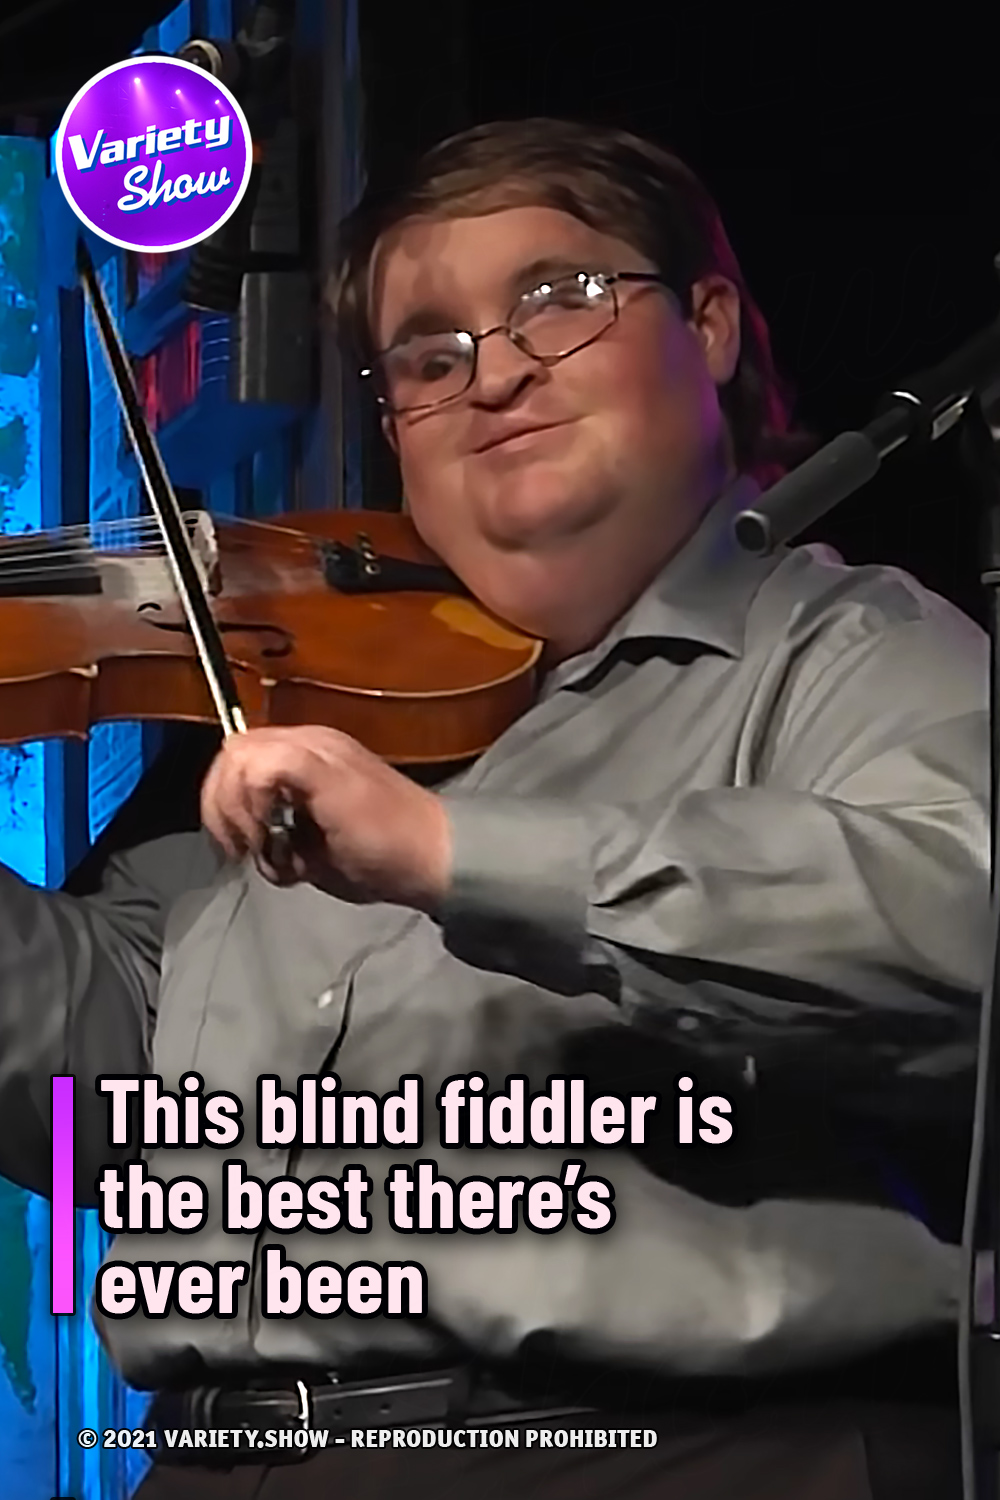 This blind fiddler is the best there’s ever been